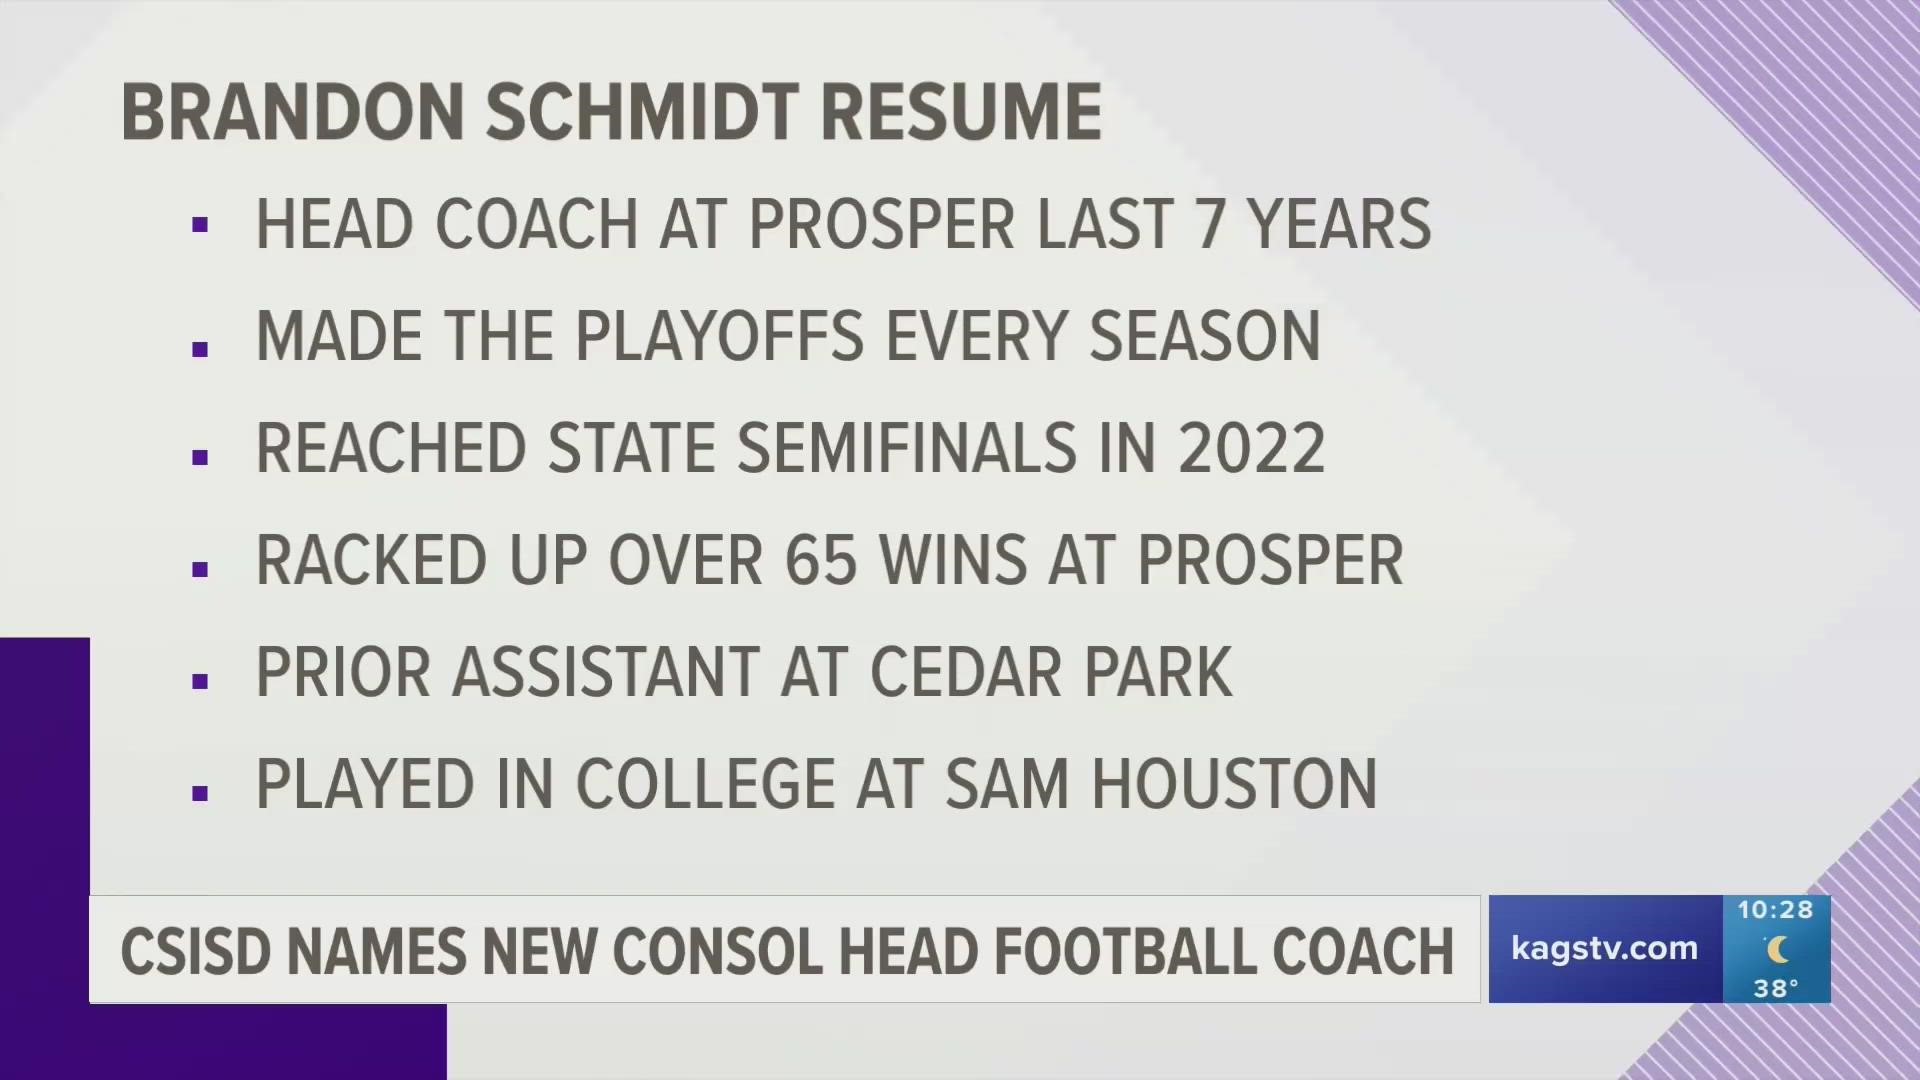 Schmidt will be recommended to take over the A&M Consolidated head football coach role at a special board meeting on Tuesday, Jan. 31.